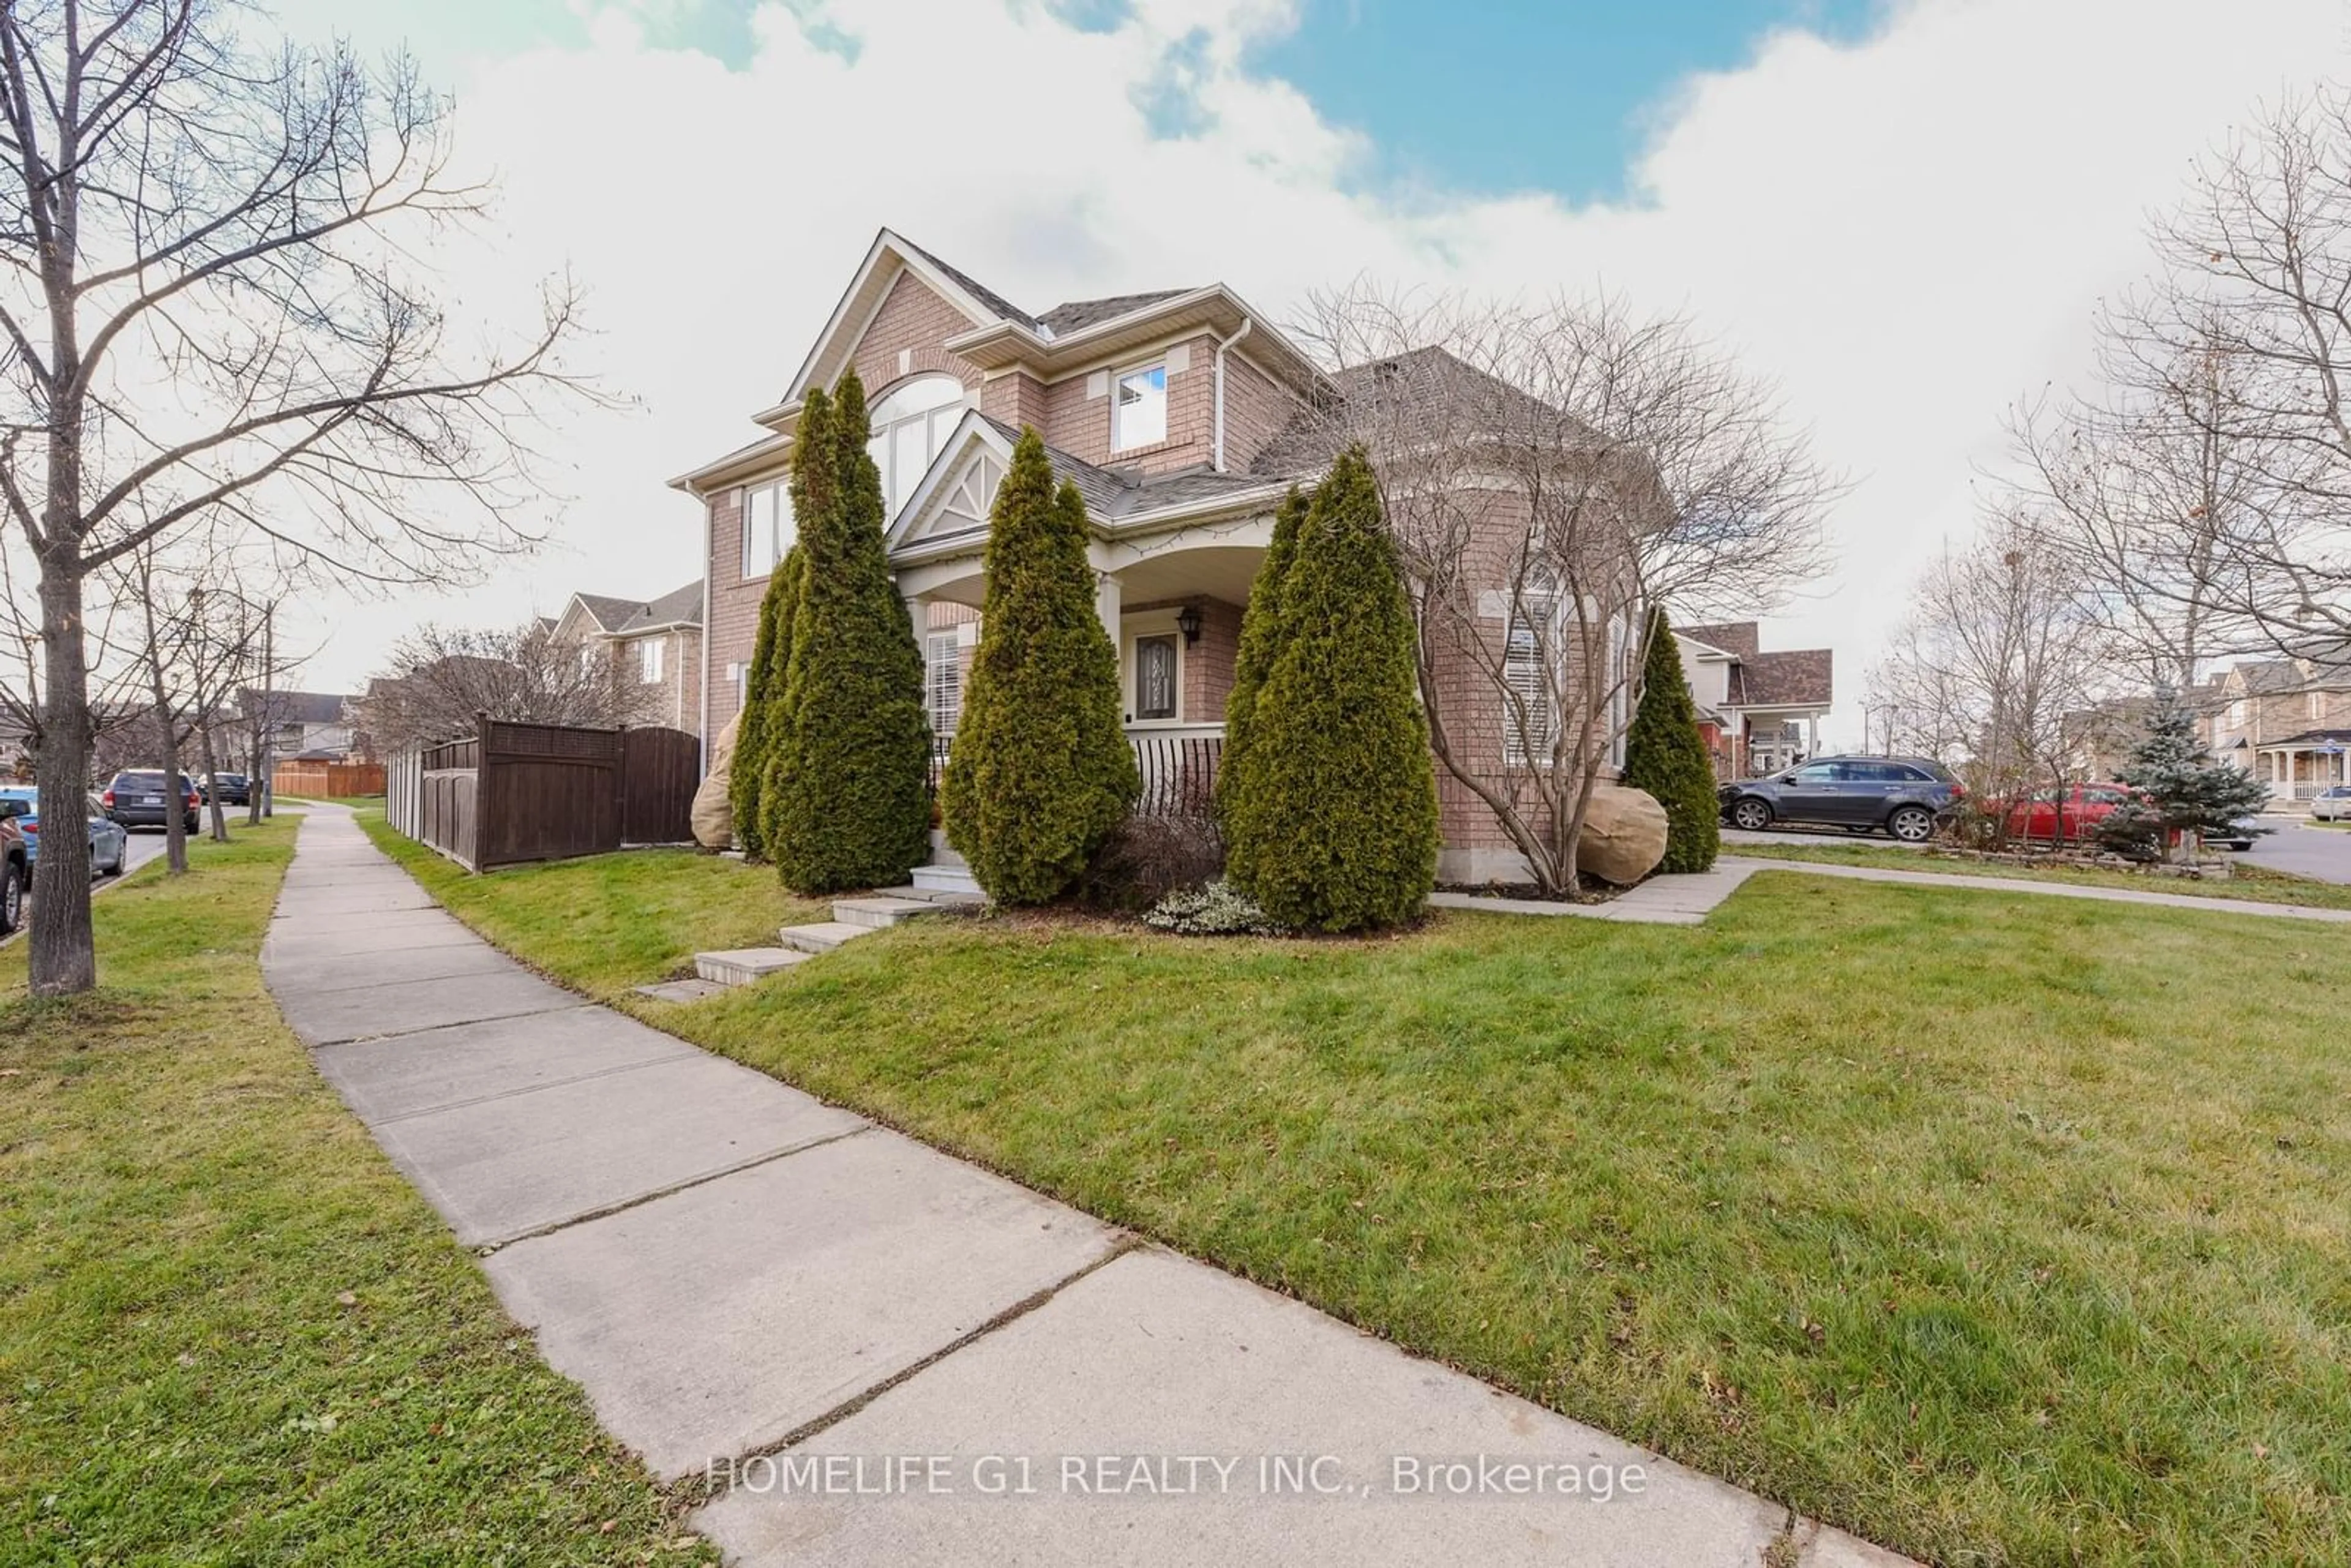 Frontside or backside of a home for 721 Dolby Cres, Milton Ontario L9T 5L8